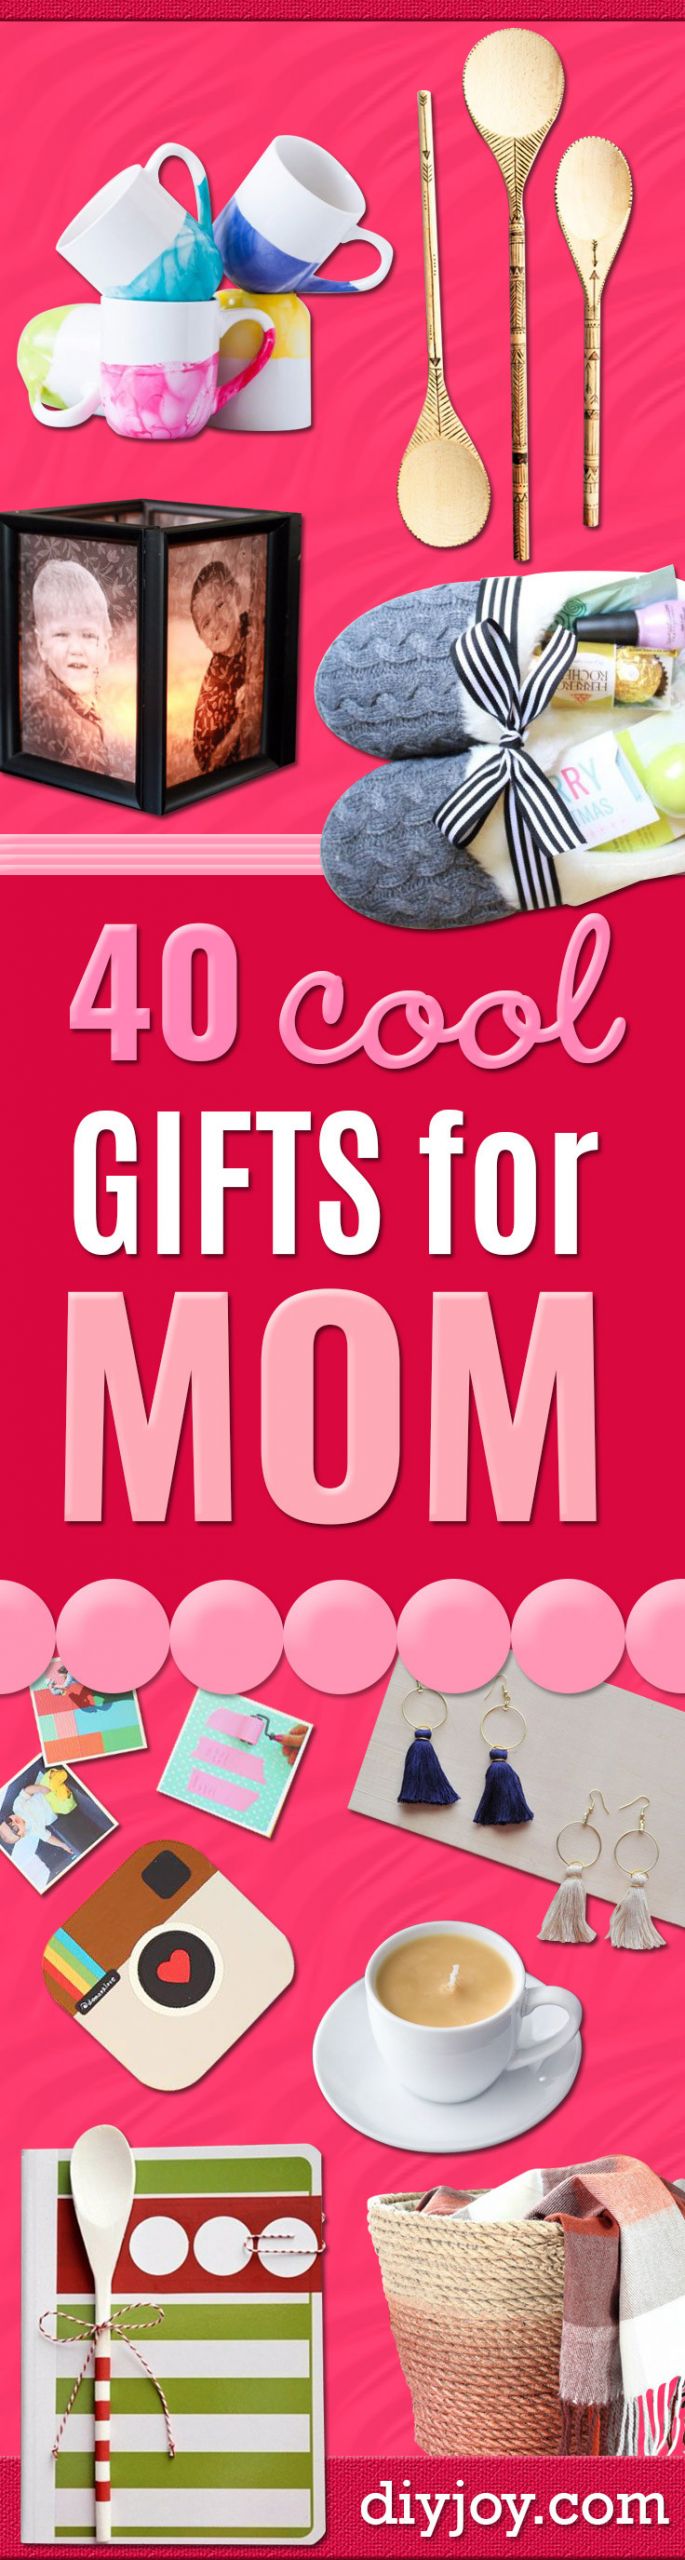 DIY Gift For Mom Christmas
 40 Coolest Gifts To Make for Mom